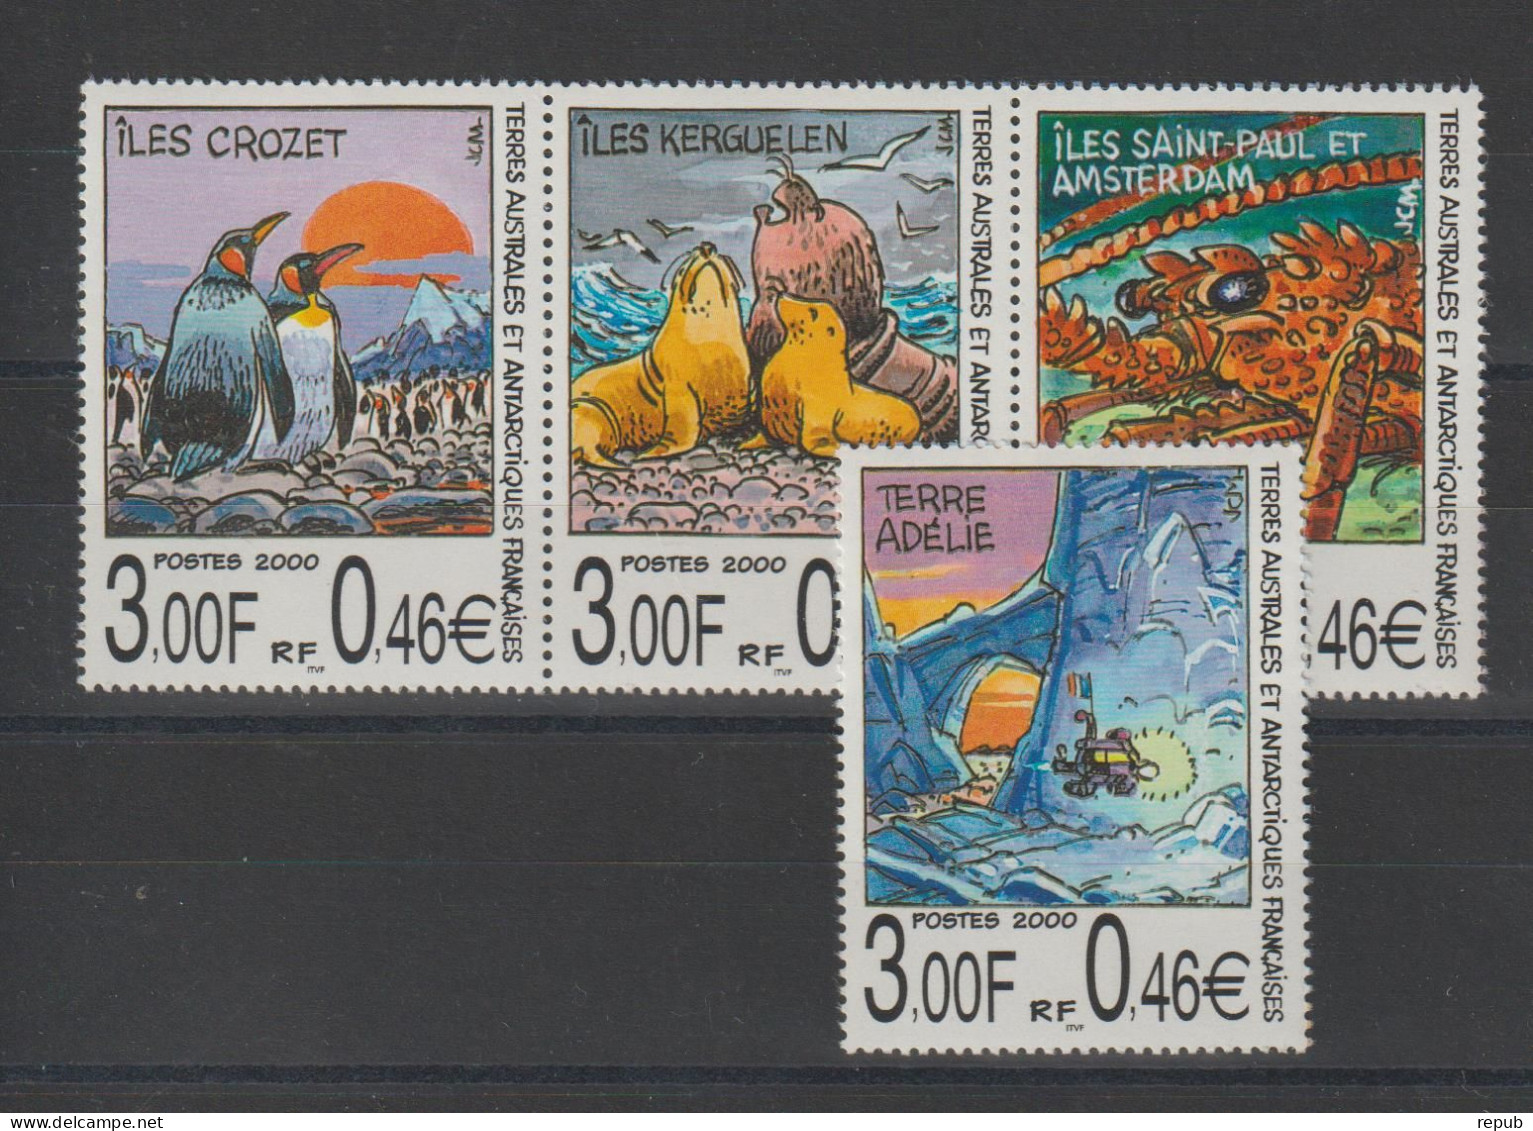 TAAF 2000 Timbres Issus Du BF 4, 281-284, 4 Val ** MNH - Ongebruikt